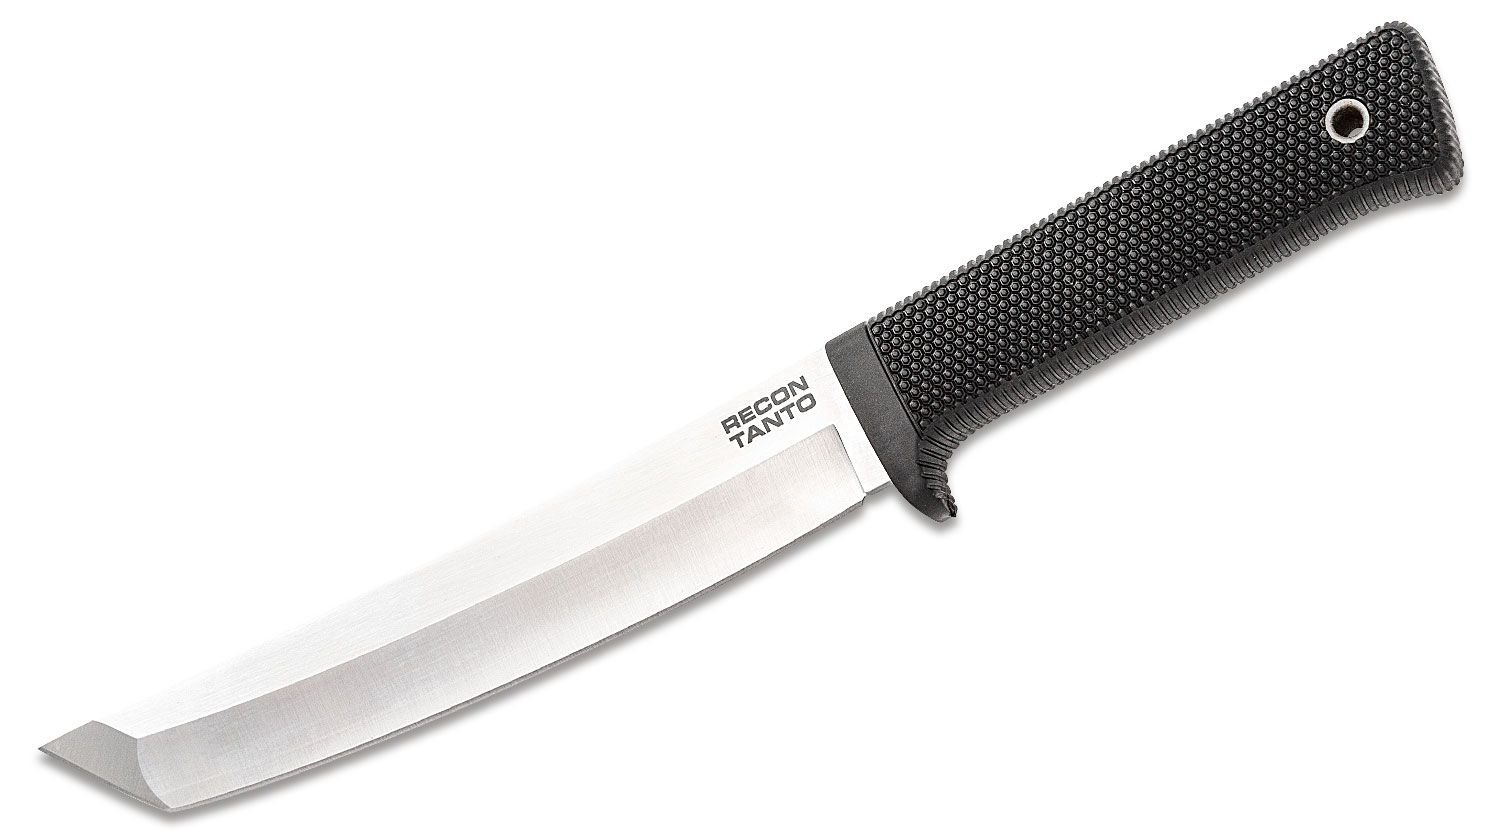 Cold Steel Knives, Satisfying Your Knife Demands